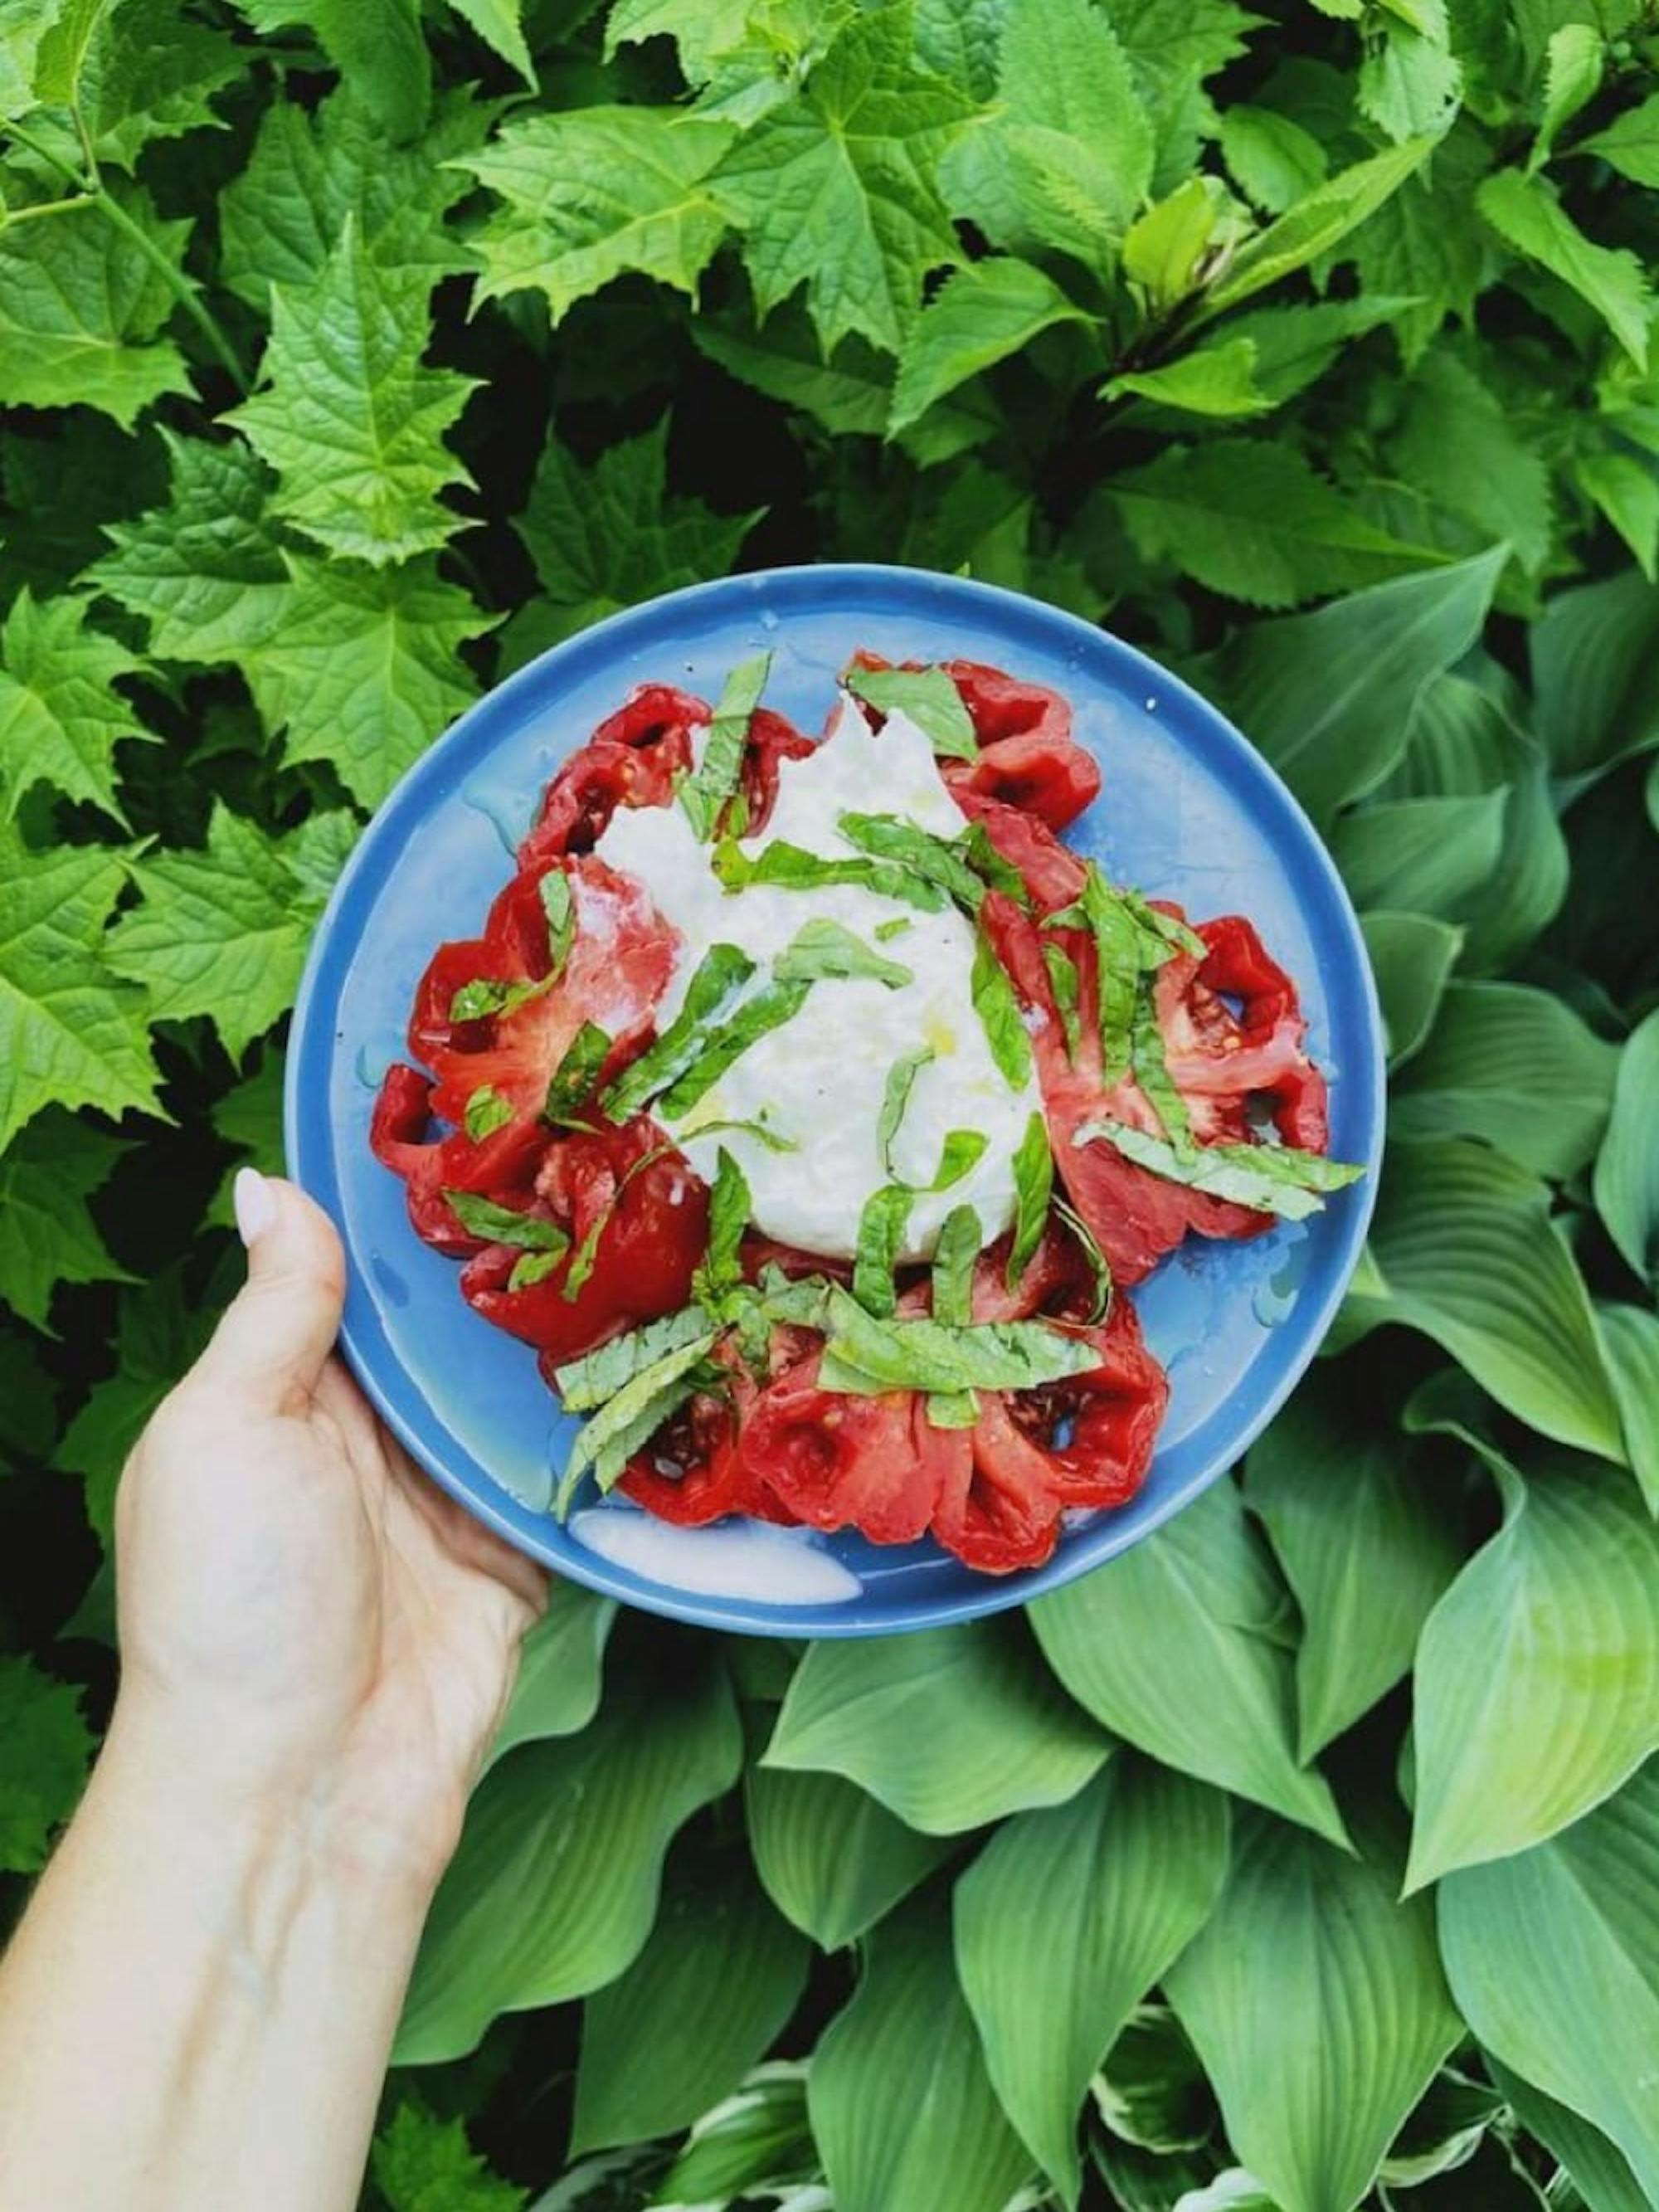 A tomato salad with burrata and basil on a blue plate. The background is bright green leaves.